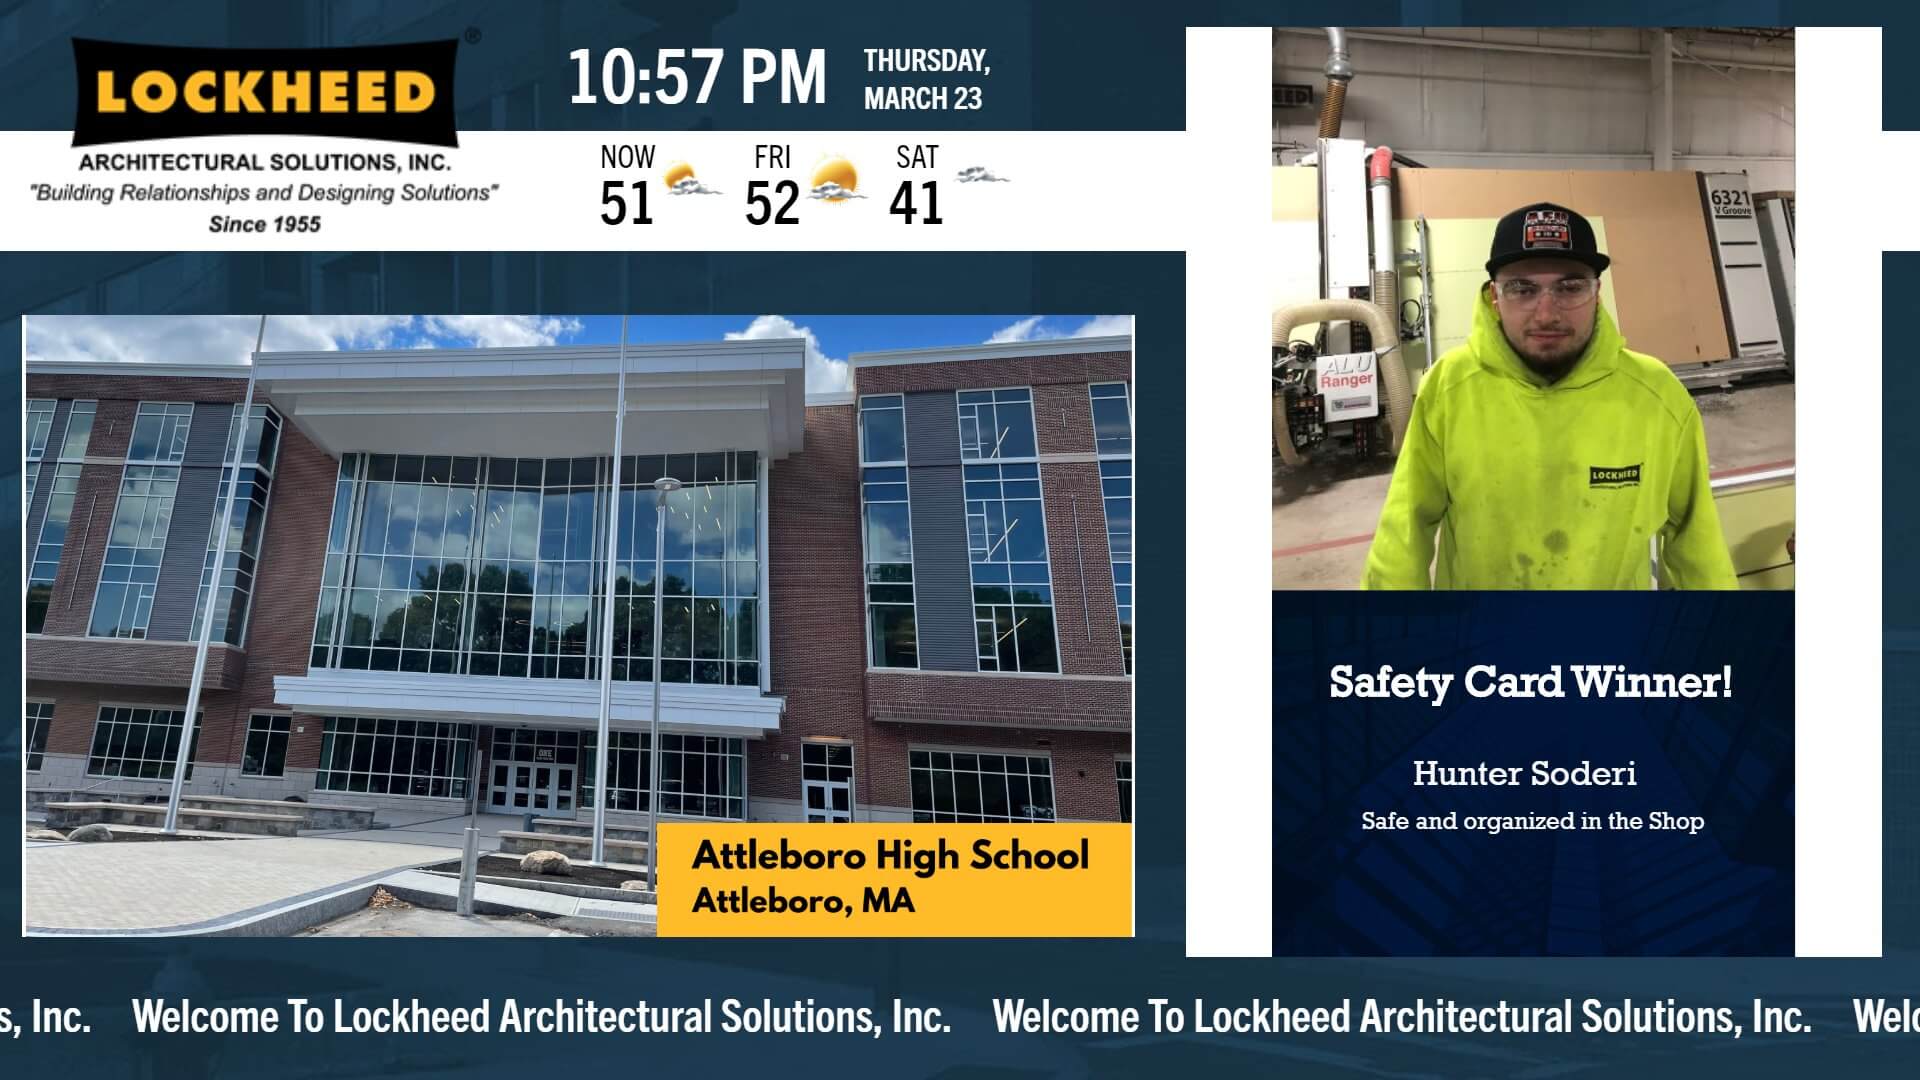 Teal corporate digital signage featuring employee highlights and work sites for Lockheed